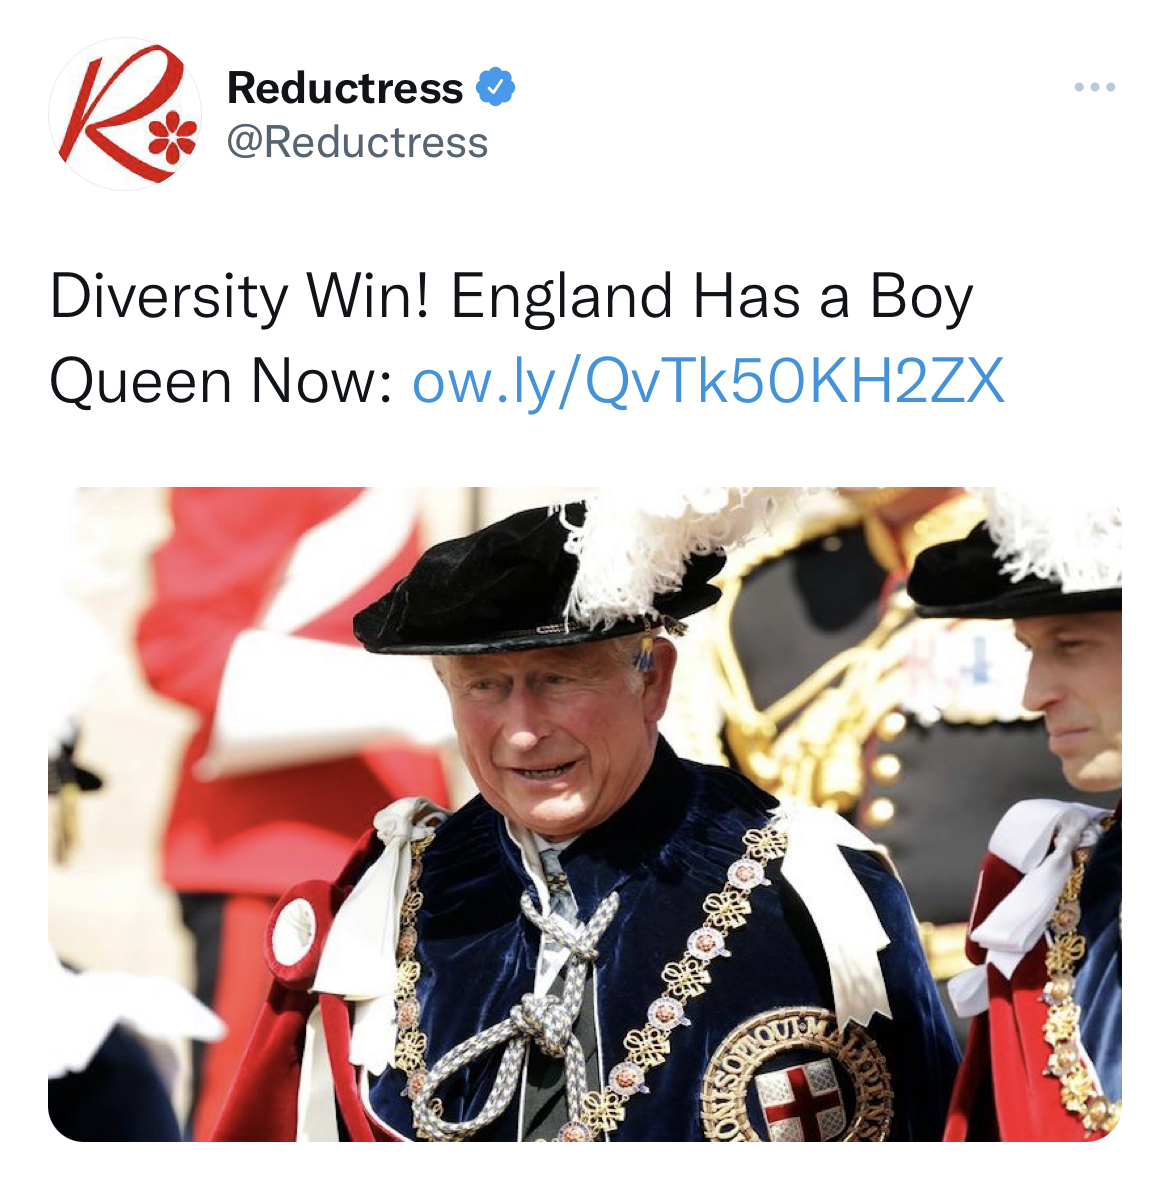 Queen Elizabeth II Death Reactions - prince charles as a knight of the garter - Reductress Diversity Win! England Has a Boy Queen Now ow.lyQvTk50KH2ZX